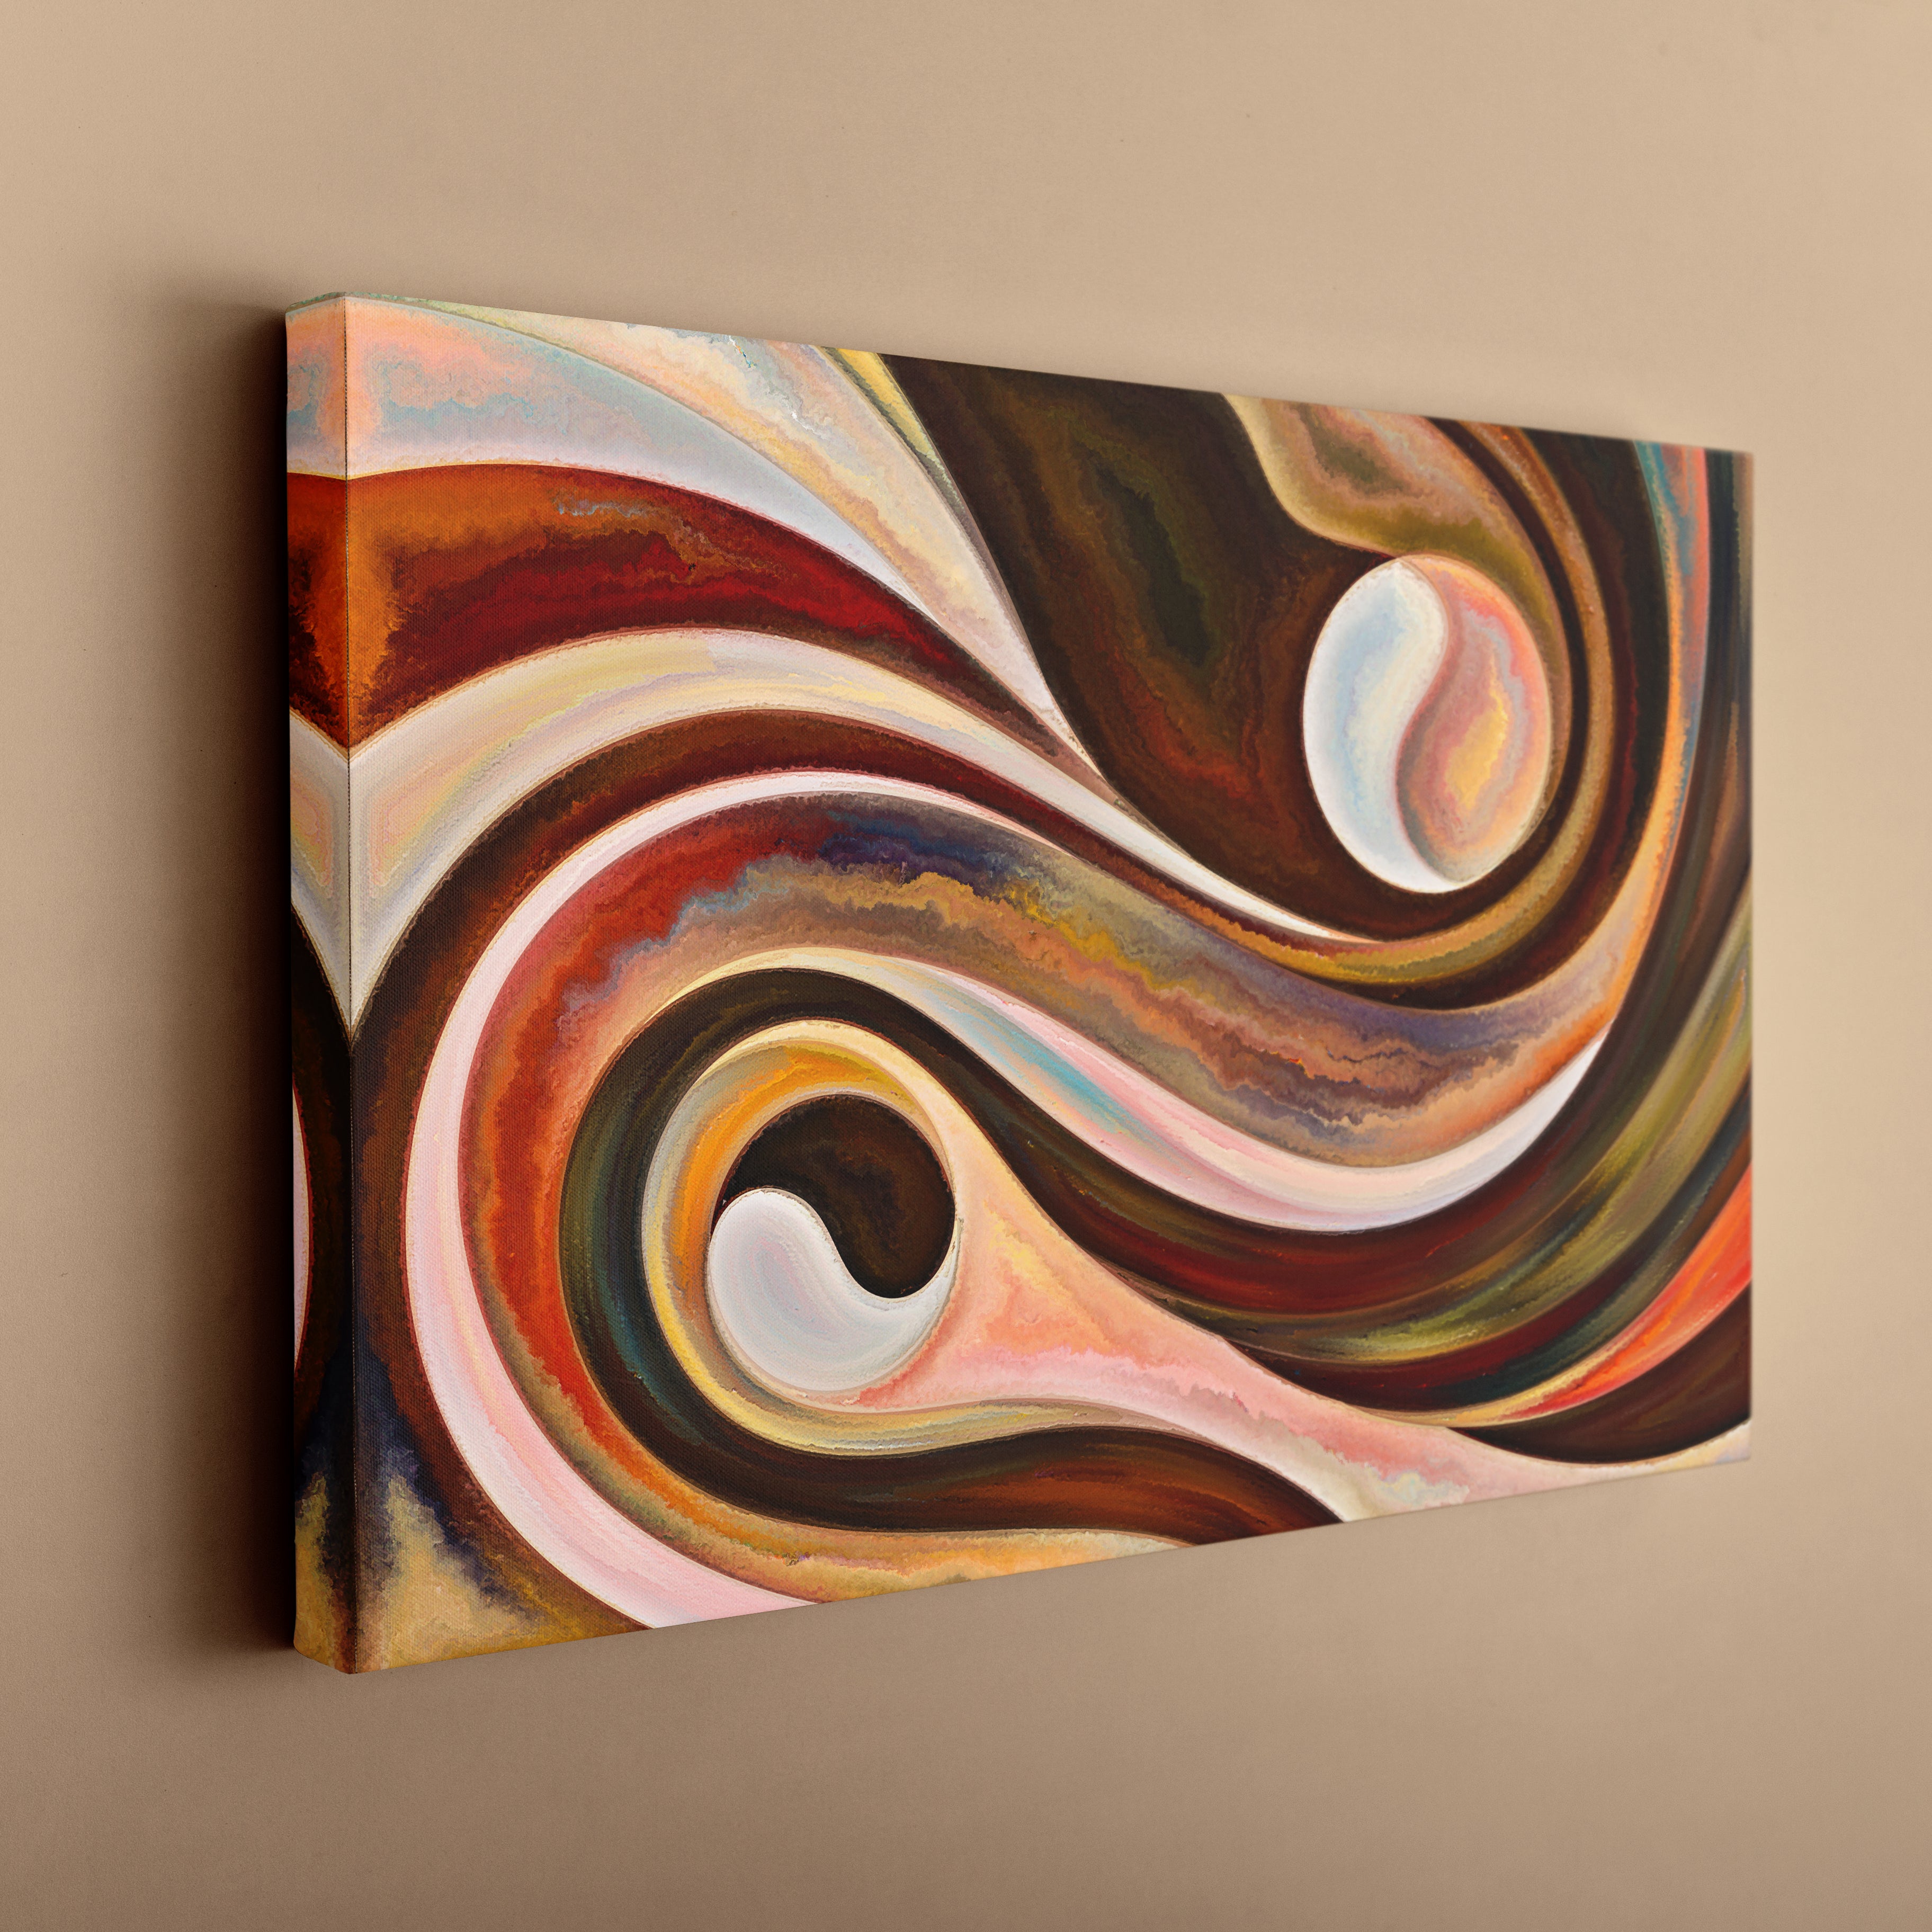 Yin Yang Curves Design and Nature Abstract Art Print Artesty 1 panel 24" x 16" 